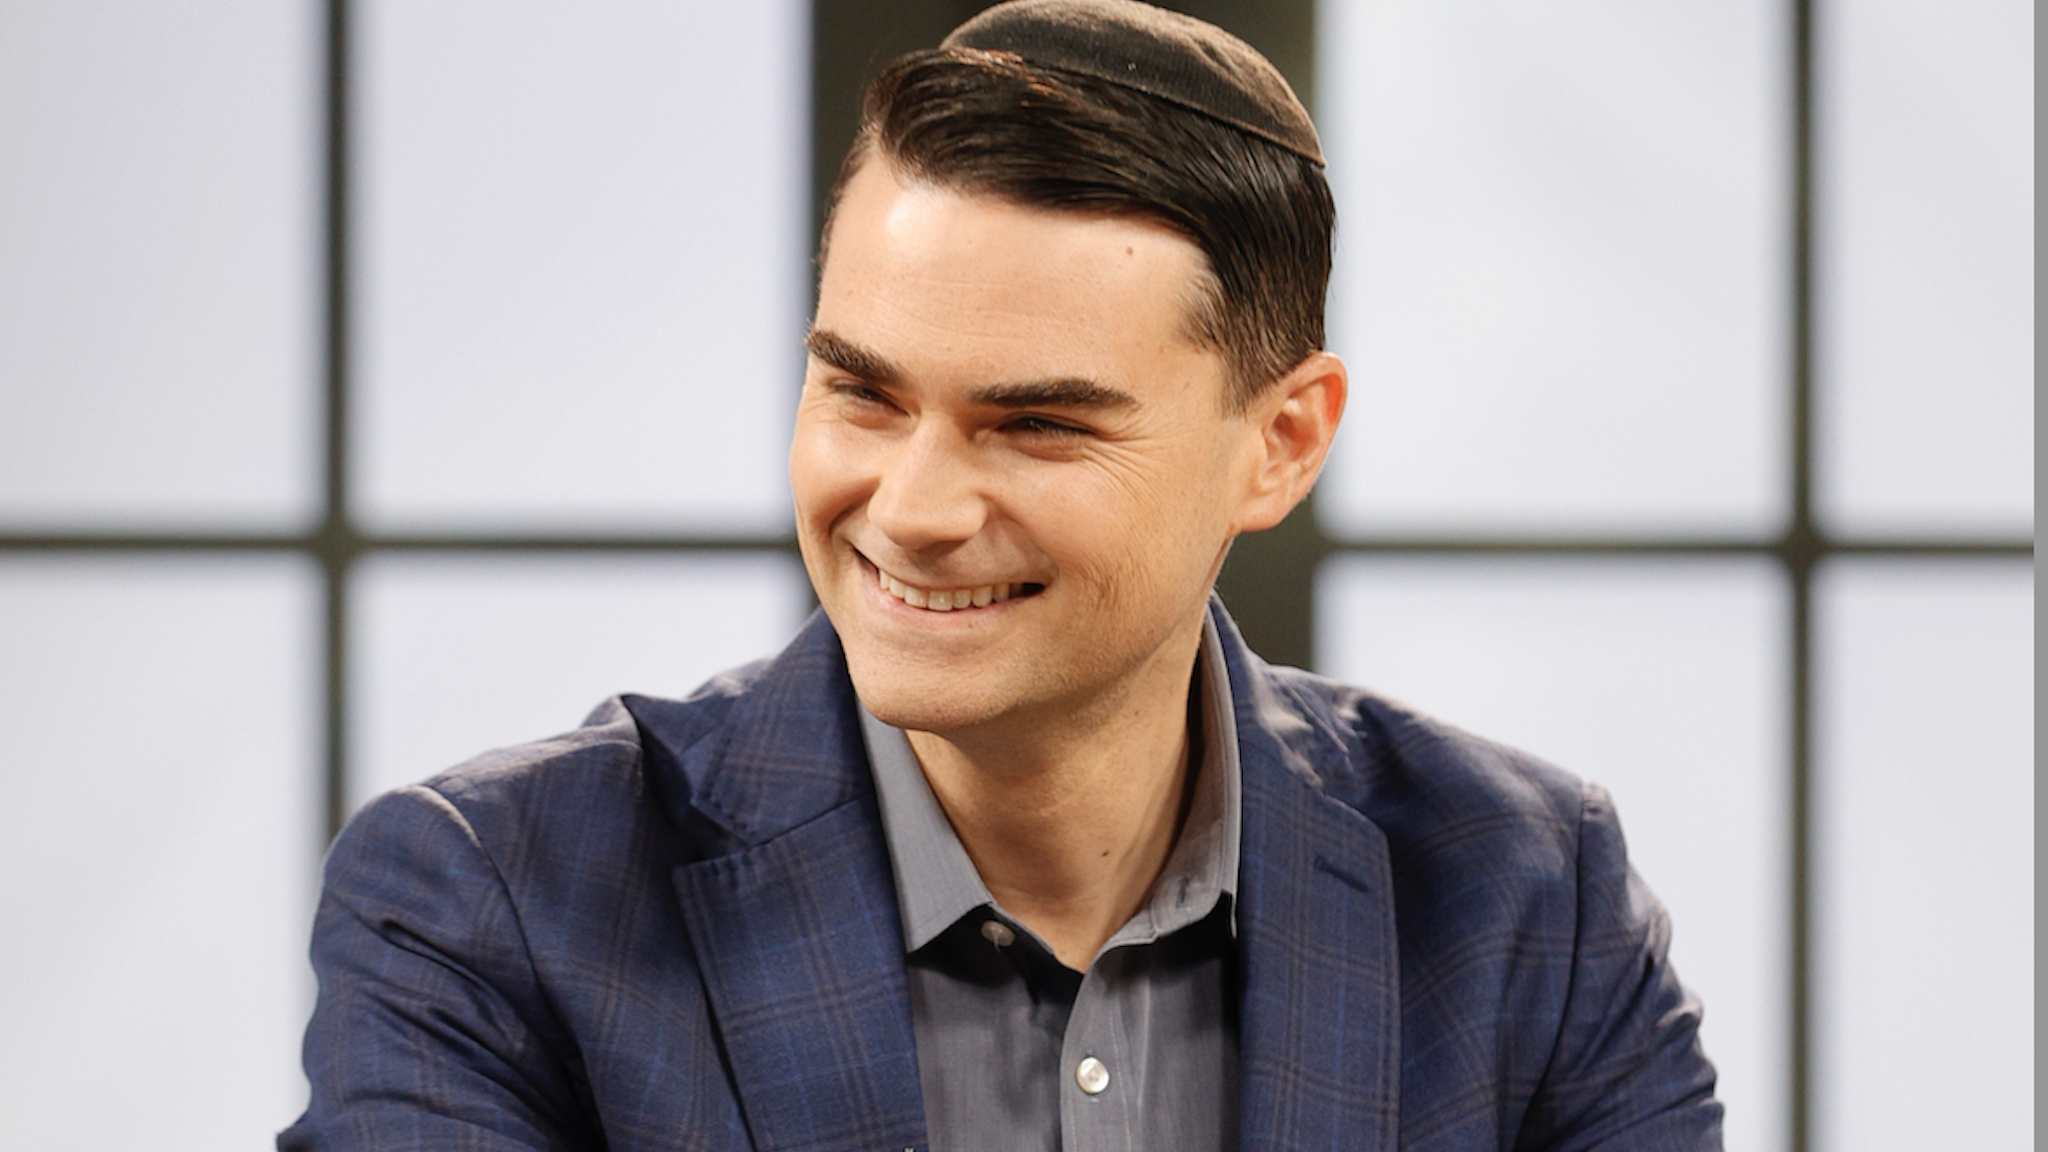 The Daily Wire's Ben Shapiro wondered where all the free speech advocates are after a trade show organizers denounced his mere presence at an event.